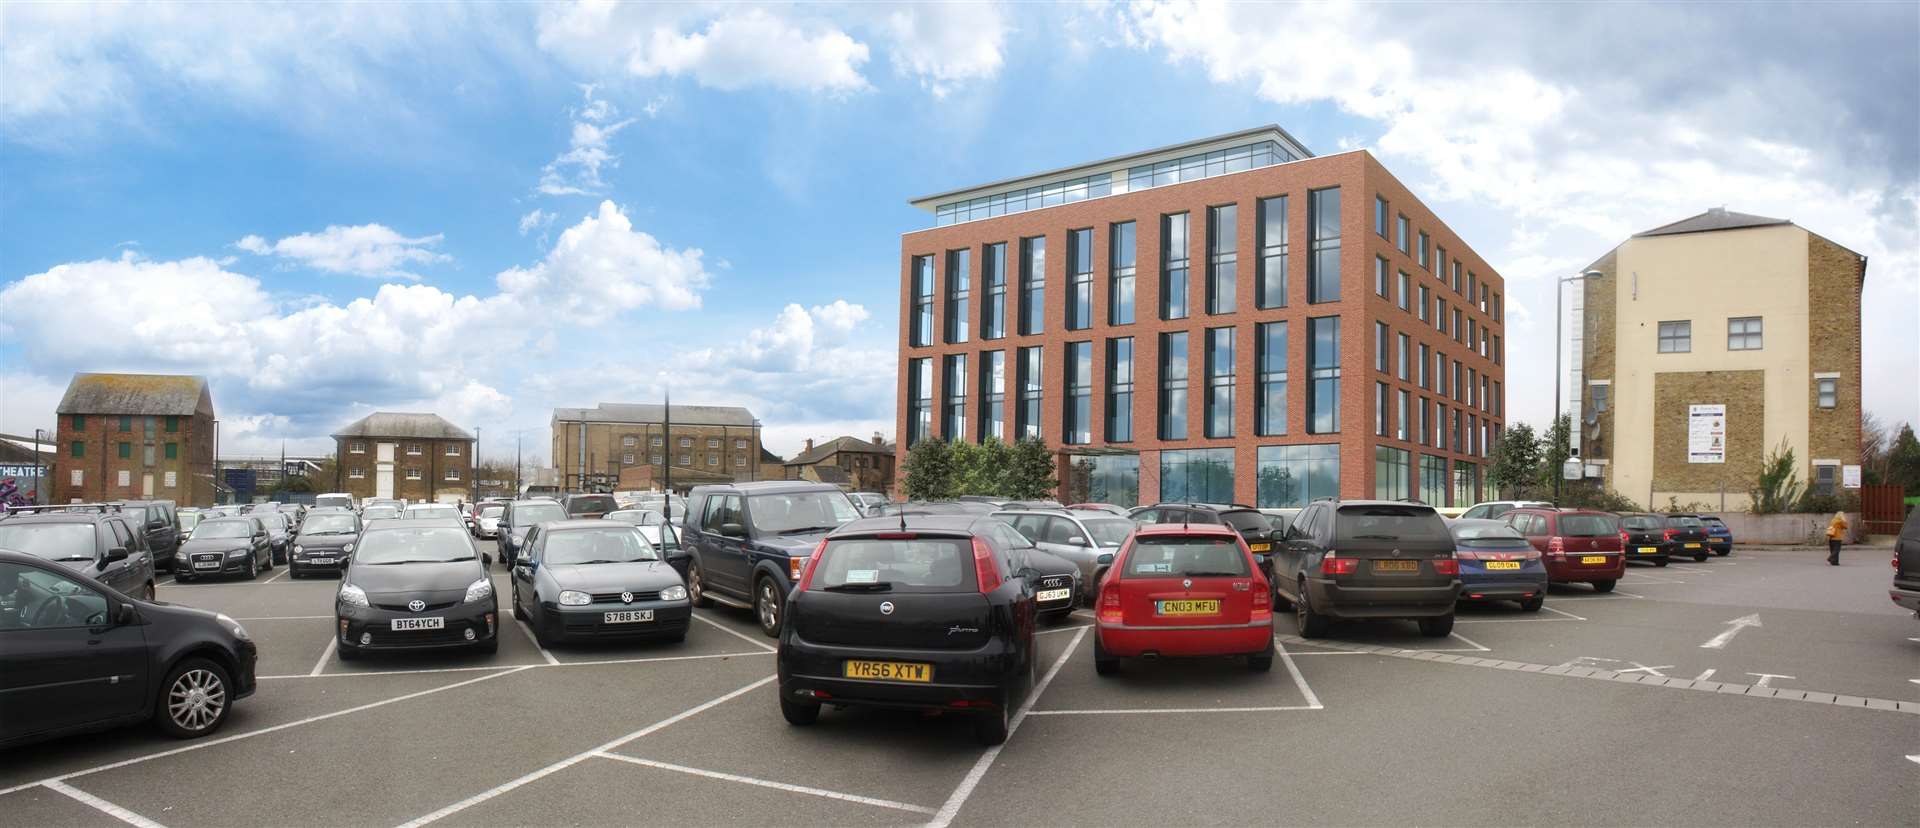 Construction of a new office block in Ashford is among very few commercial developments happening in Kent